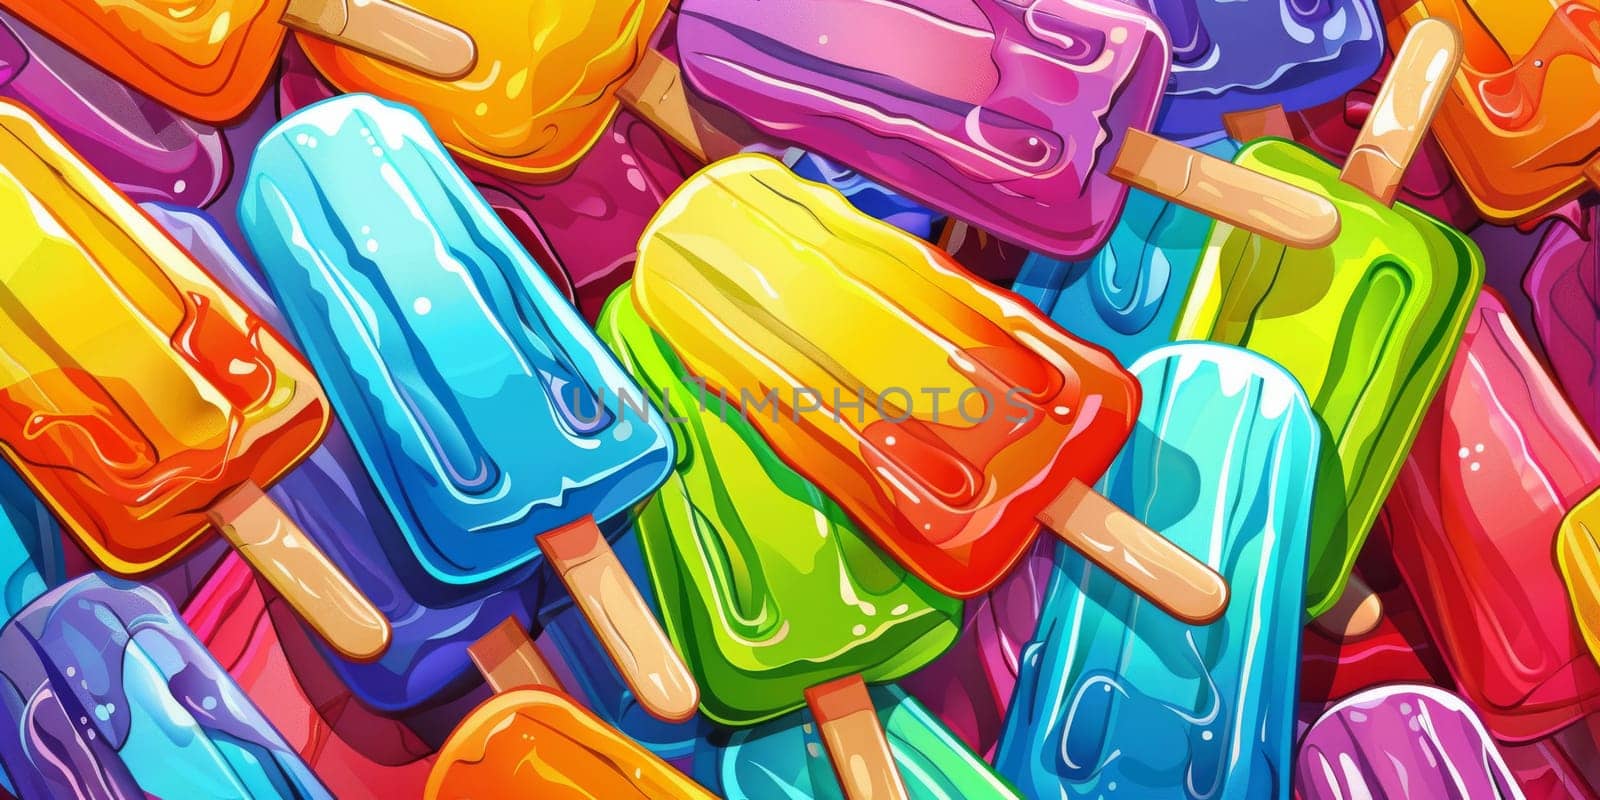 Colorful ice, fruity lolly as background or texture, a food concept